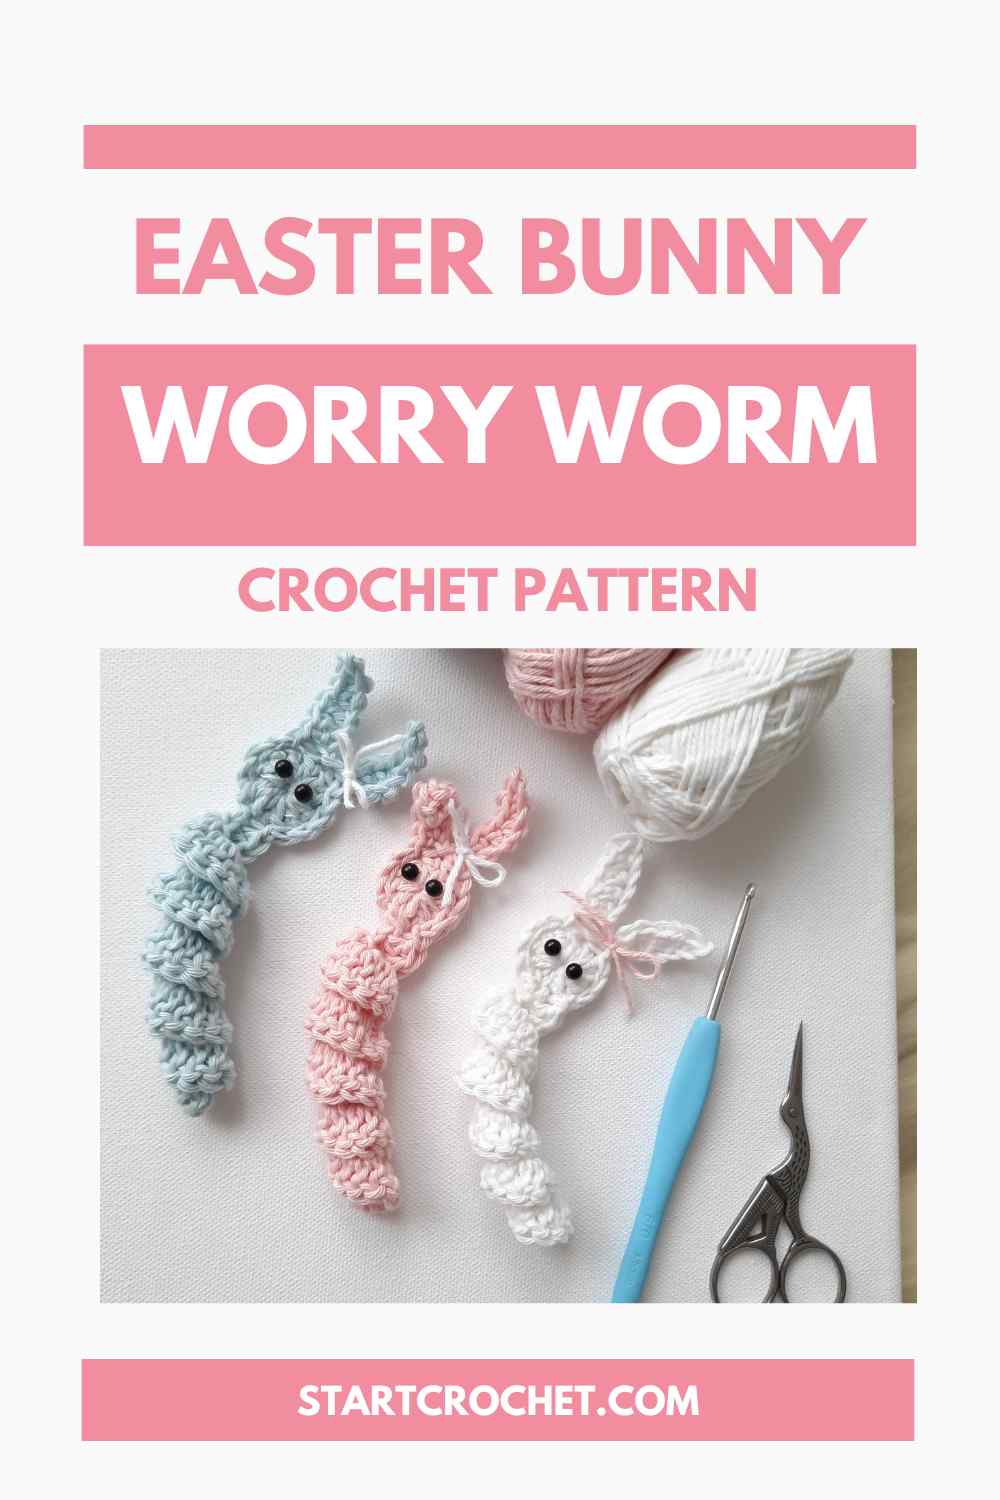 Easter Bunny Worry Worm Crochet Pattern